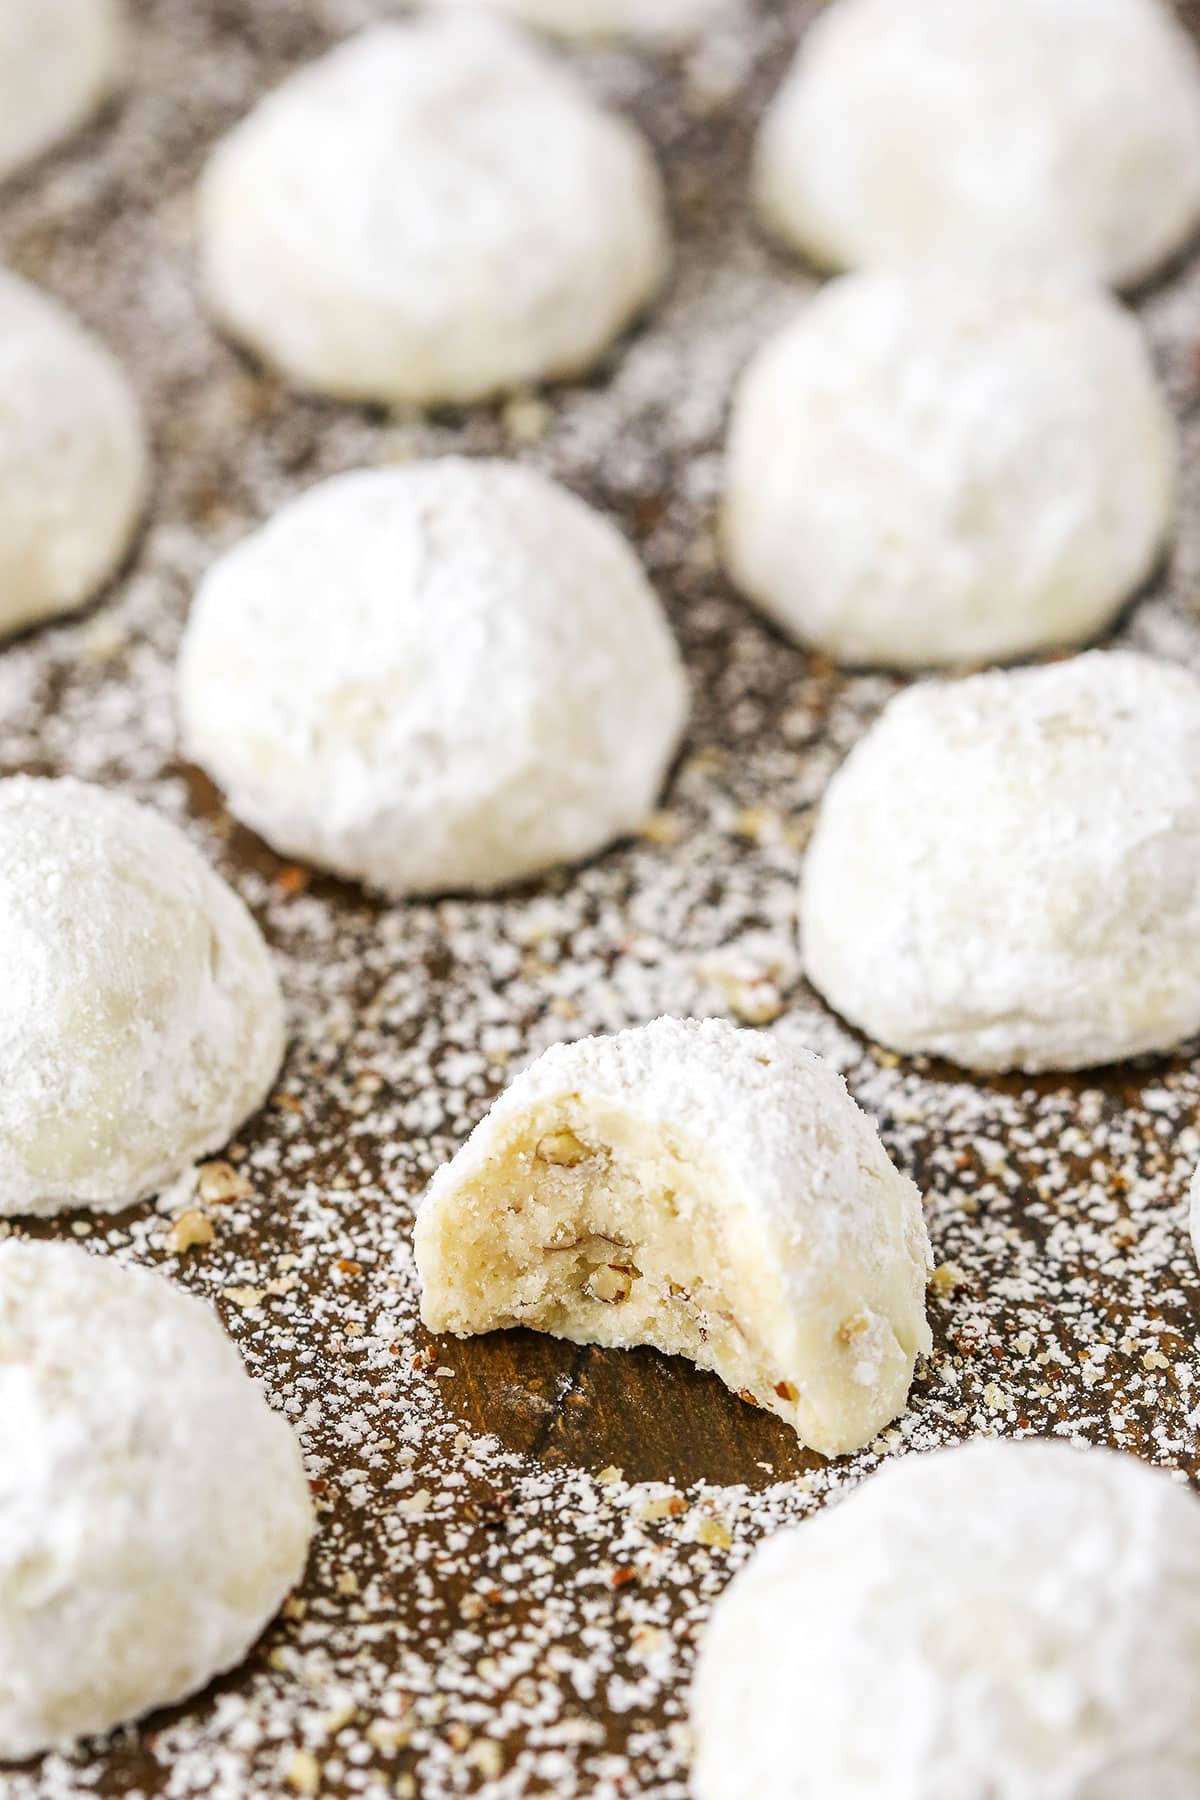 Russian Tea Cakes spread out evenly on a wooden board with one missing a bite and coated in powdered sugar